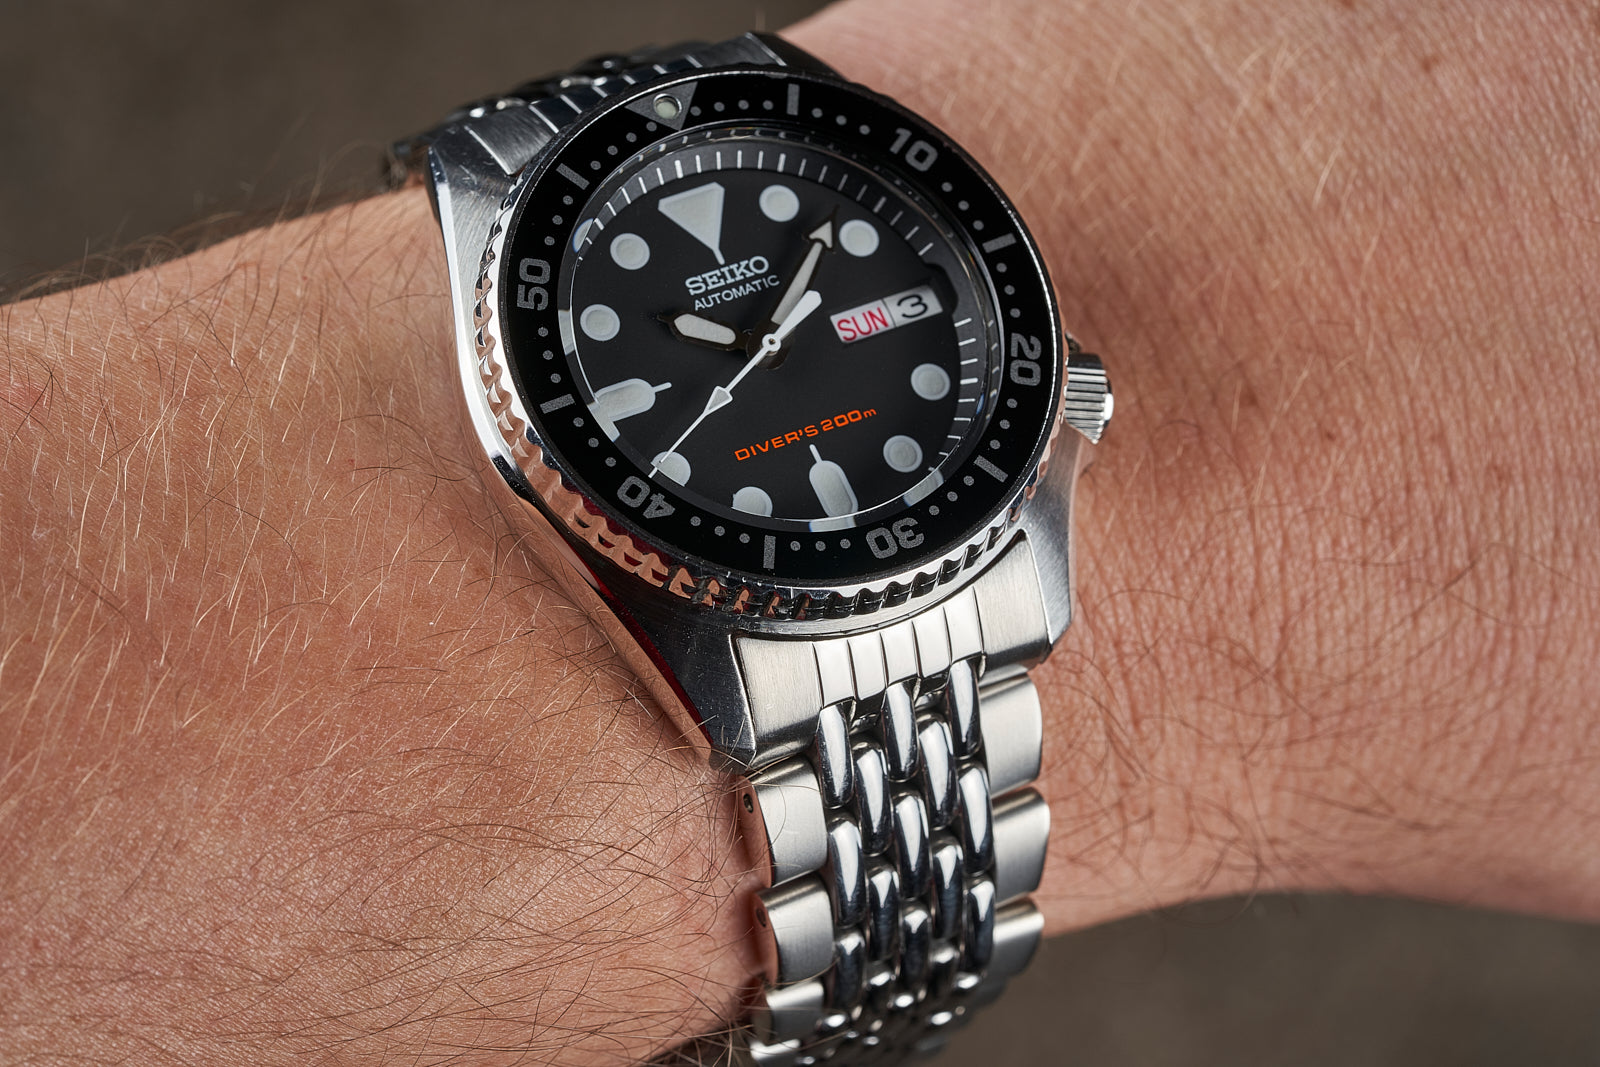 5 Best Watch Straps for the Seiko SKX013 • The Slender Wrist